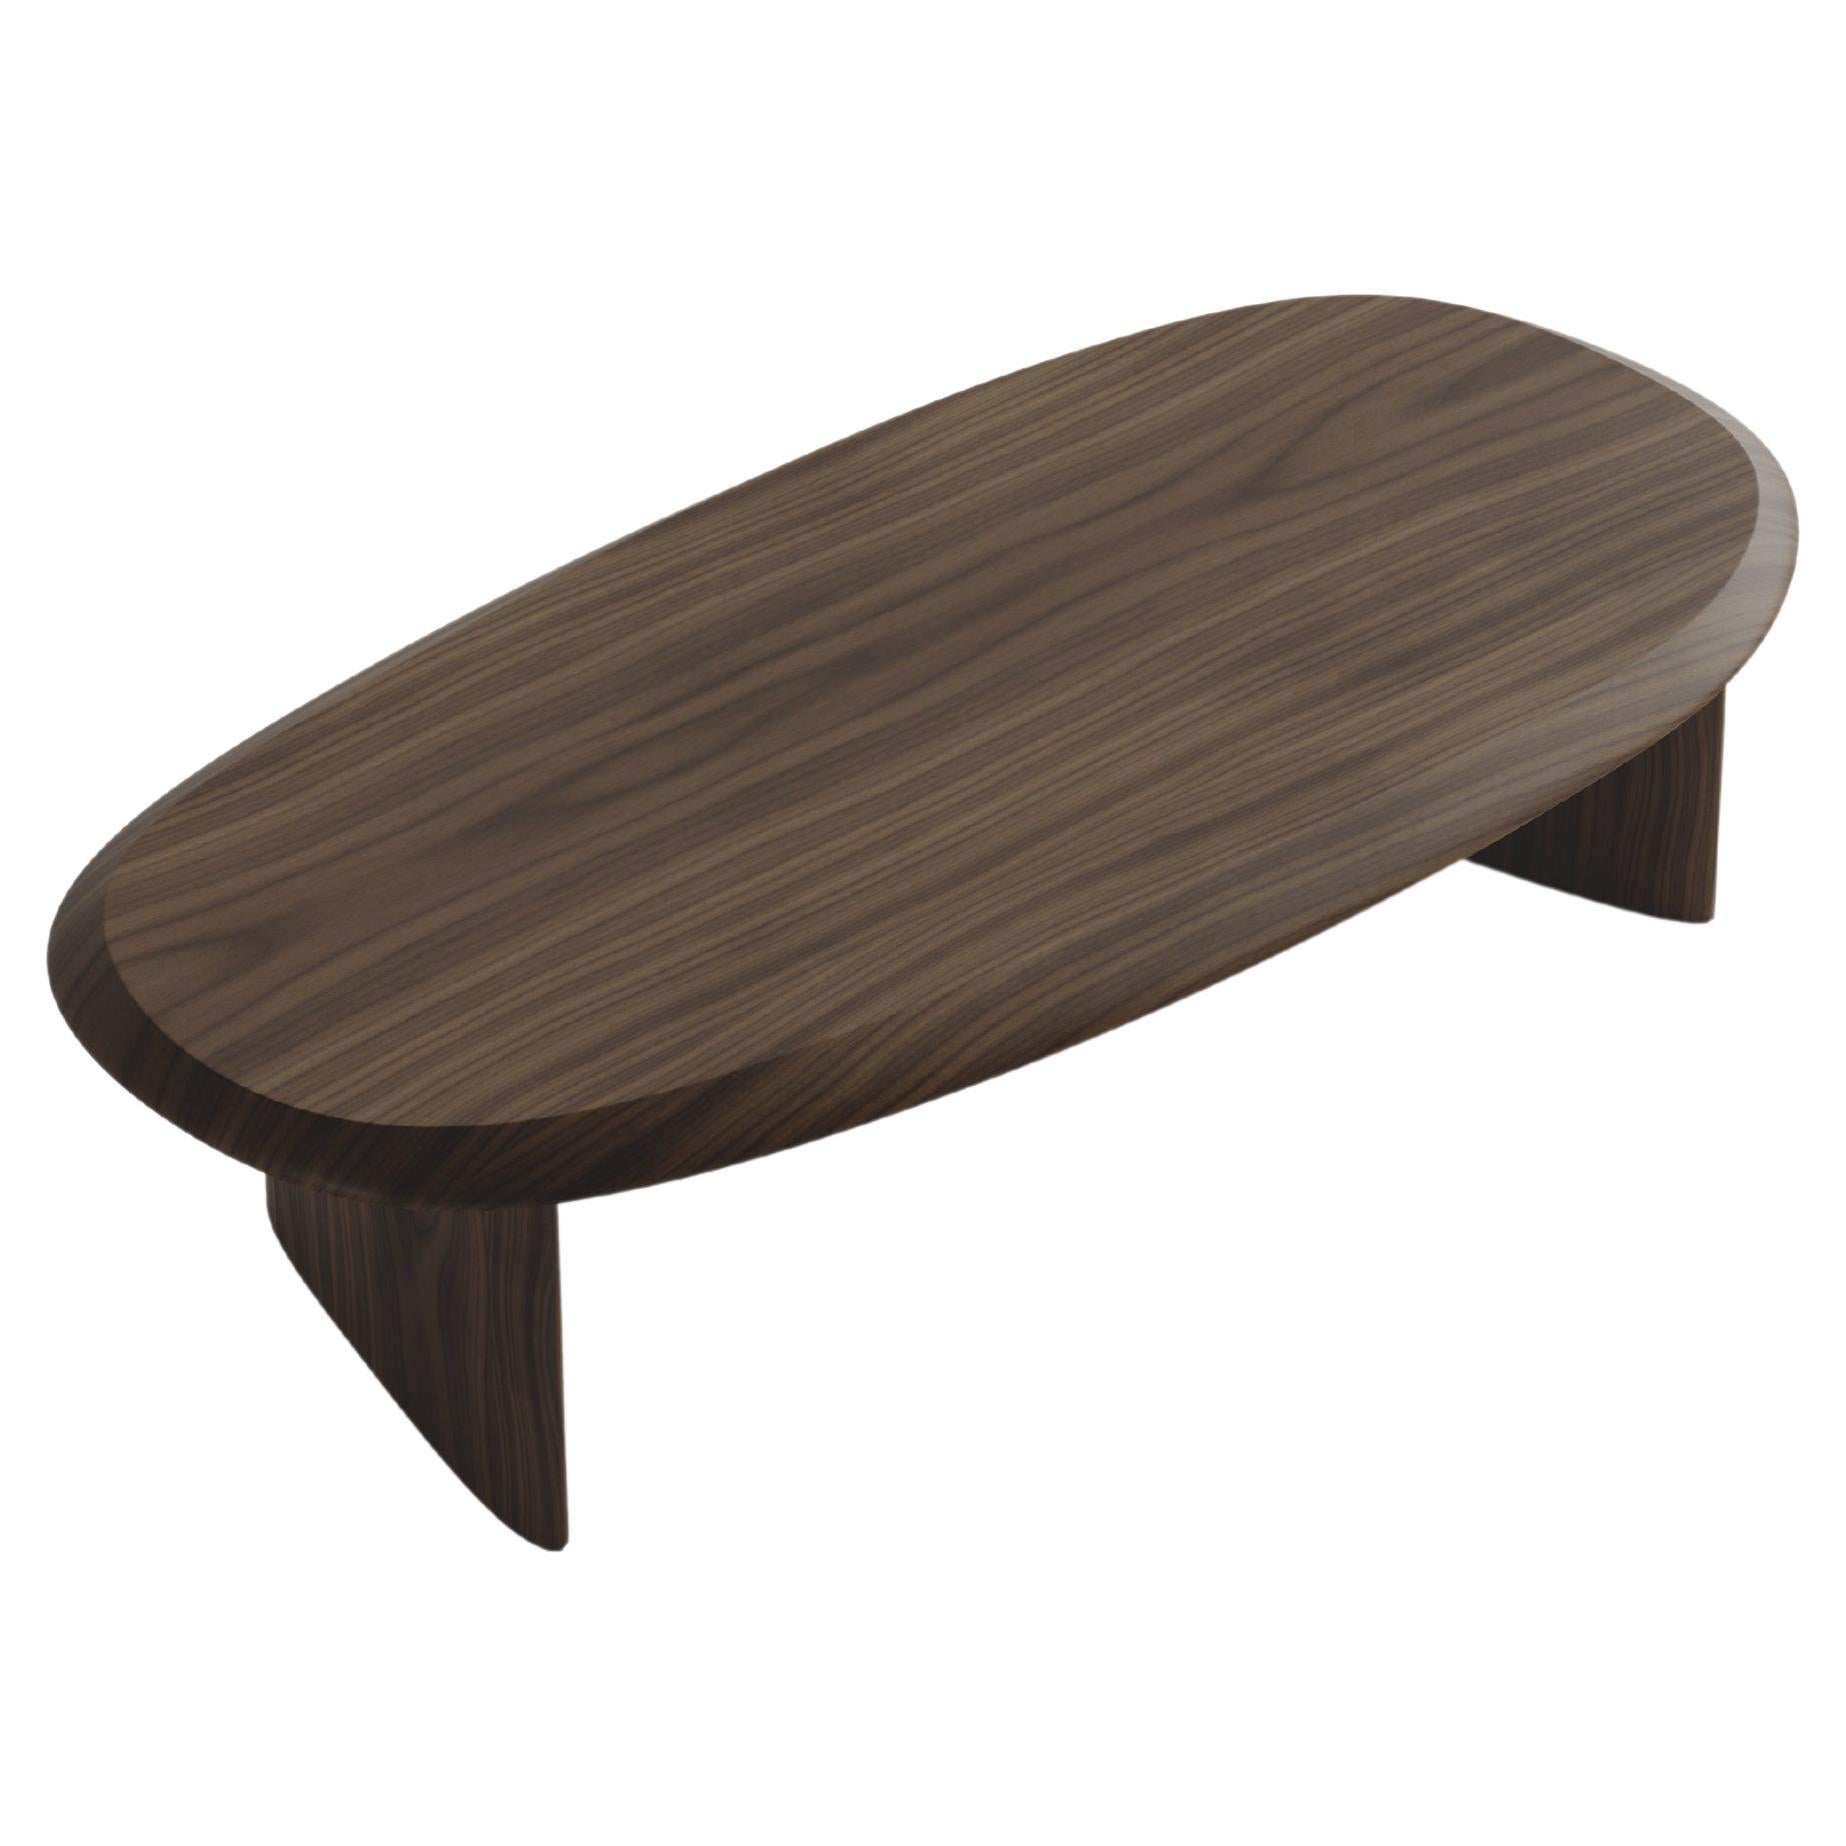 Duna Rectangular Coffee Table in Solid Walnut Wood Coffee Table by Joel Escalona For Sale